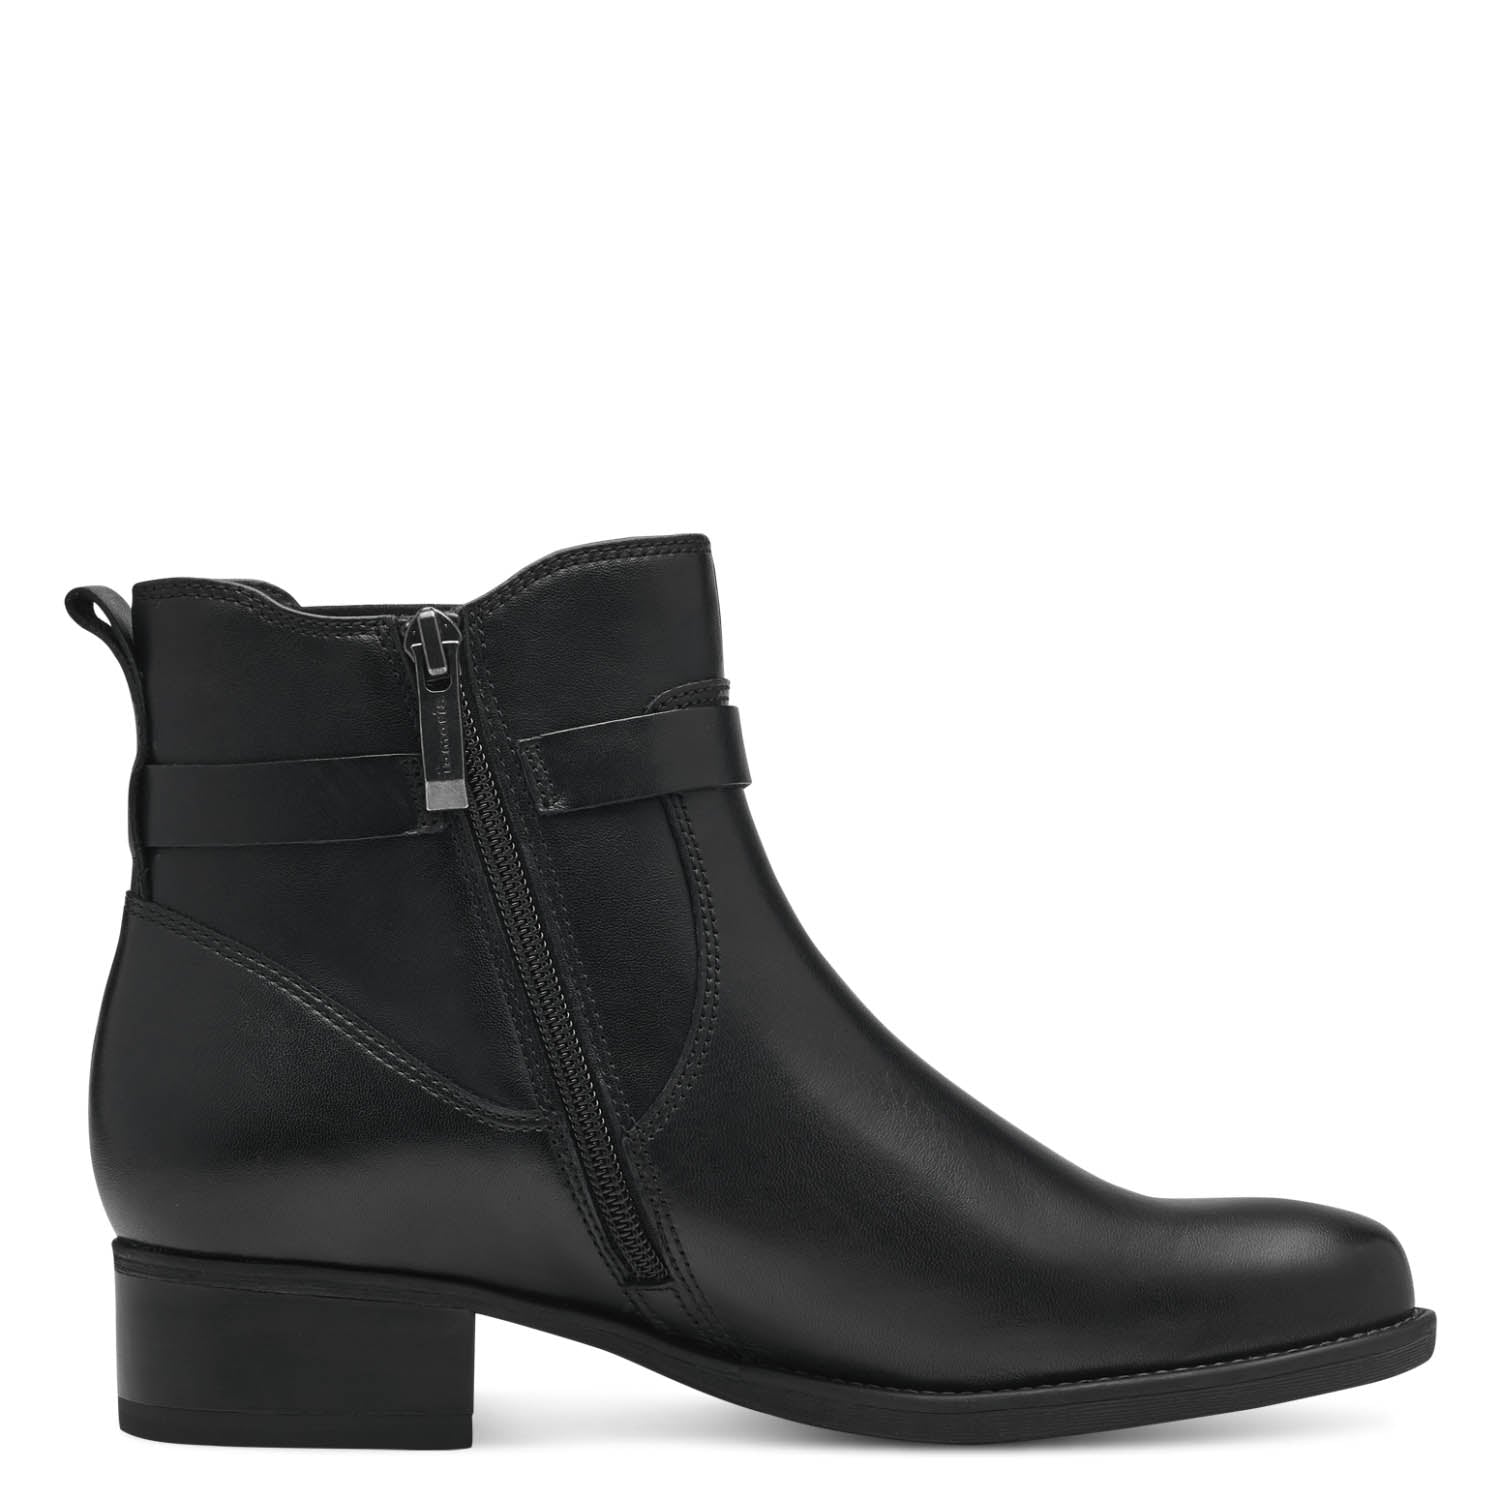 Side inner view of the Tamaris Black Leather Ankle Boot illustrating the interior zipper.